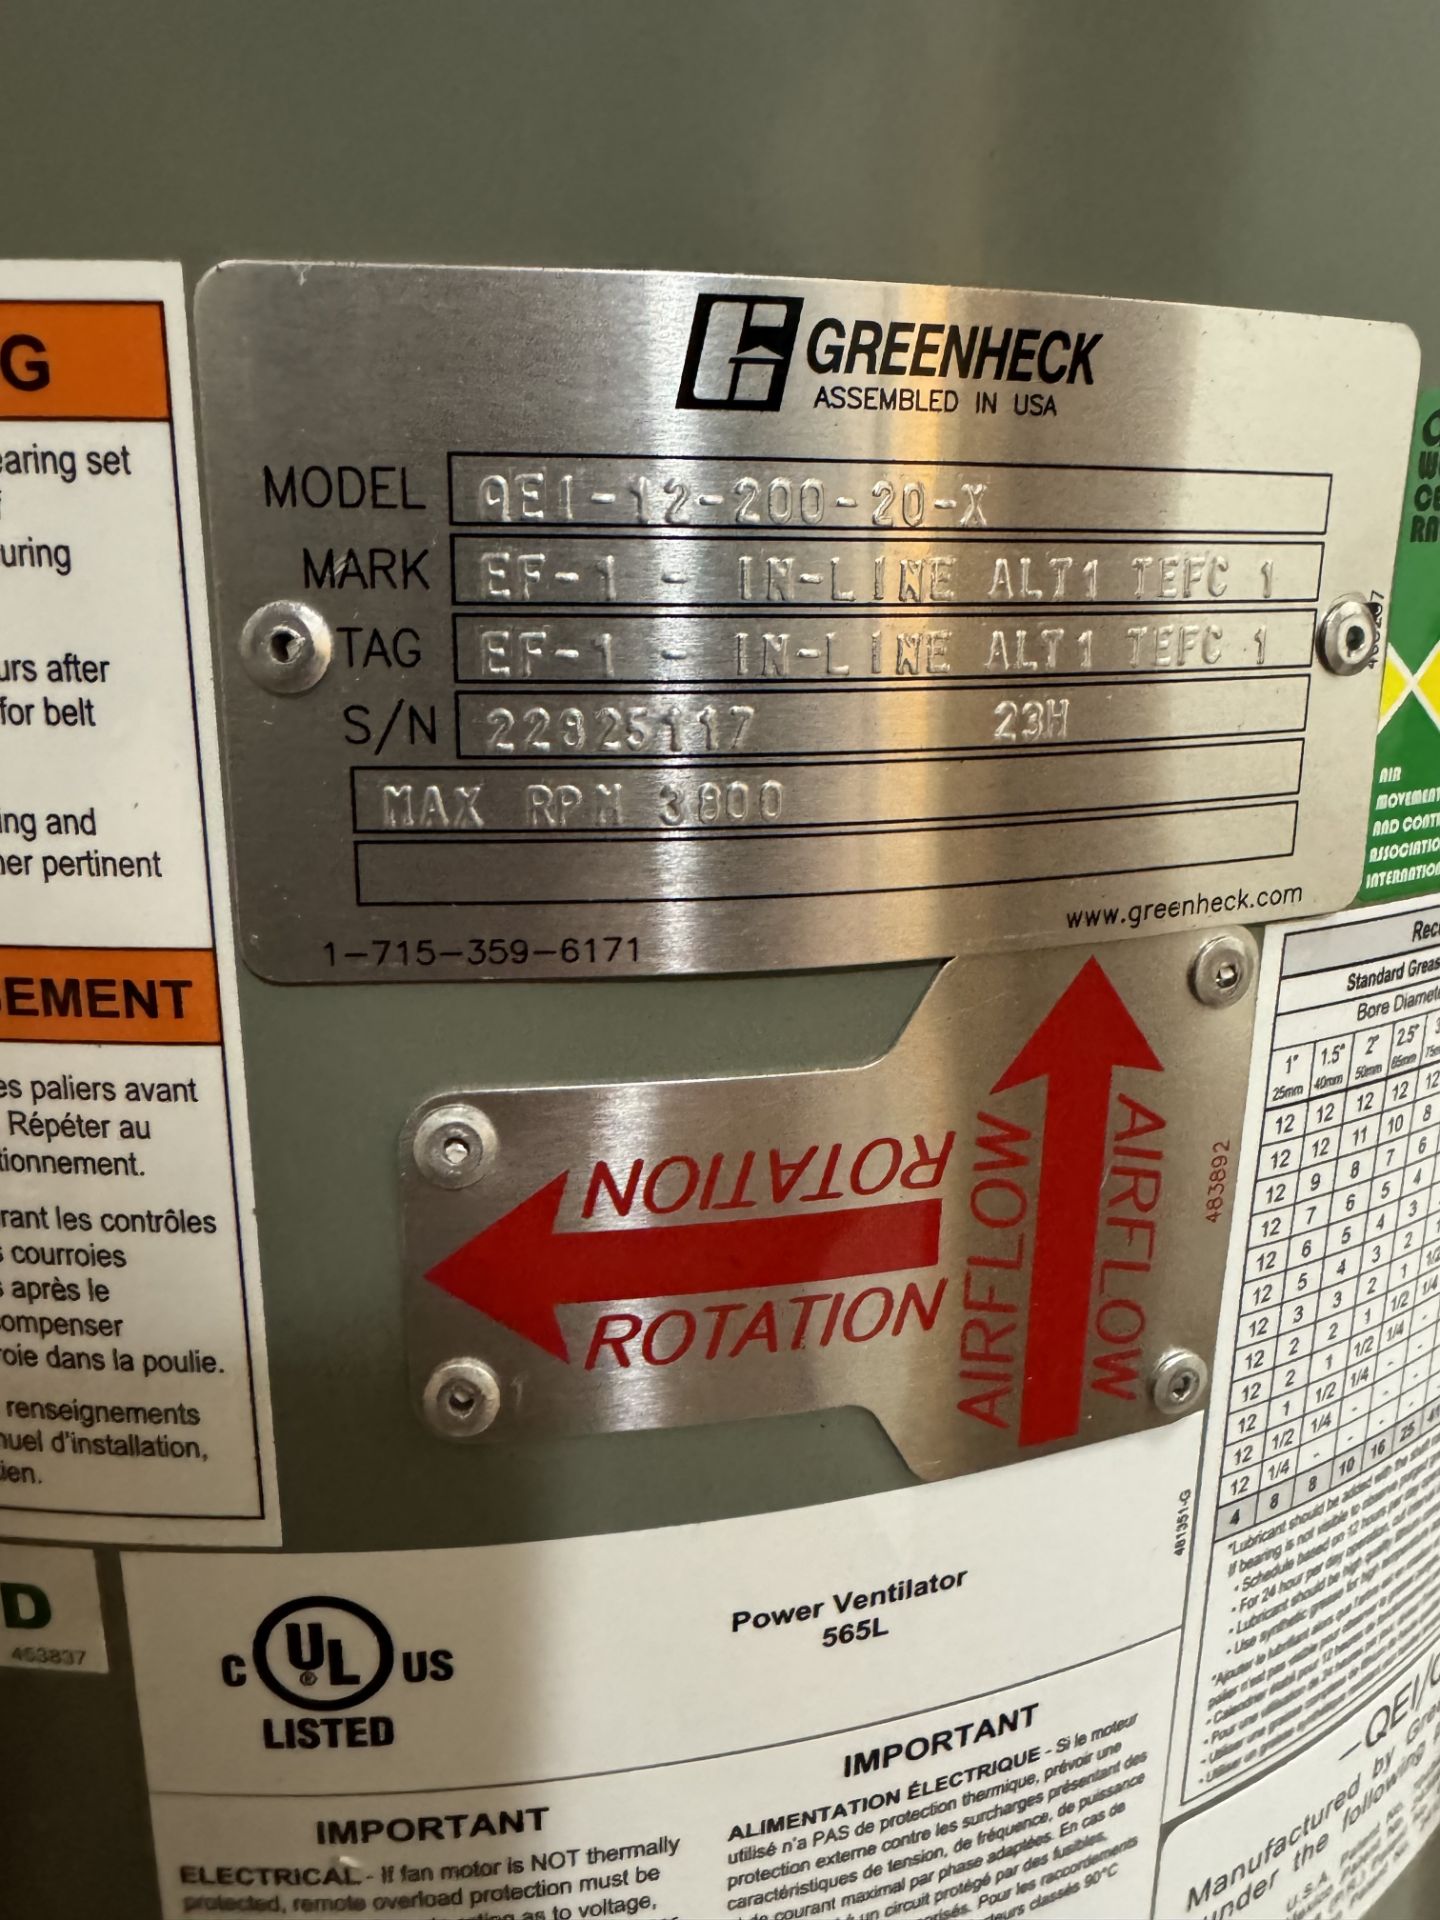 New/Unused Greenheck Mixed Flow Fan & Exhaust Unit. Model QEI-12-200-20-X - Image 3 of 5